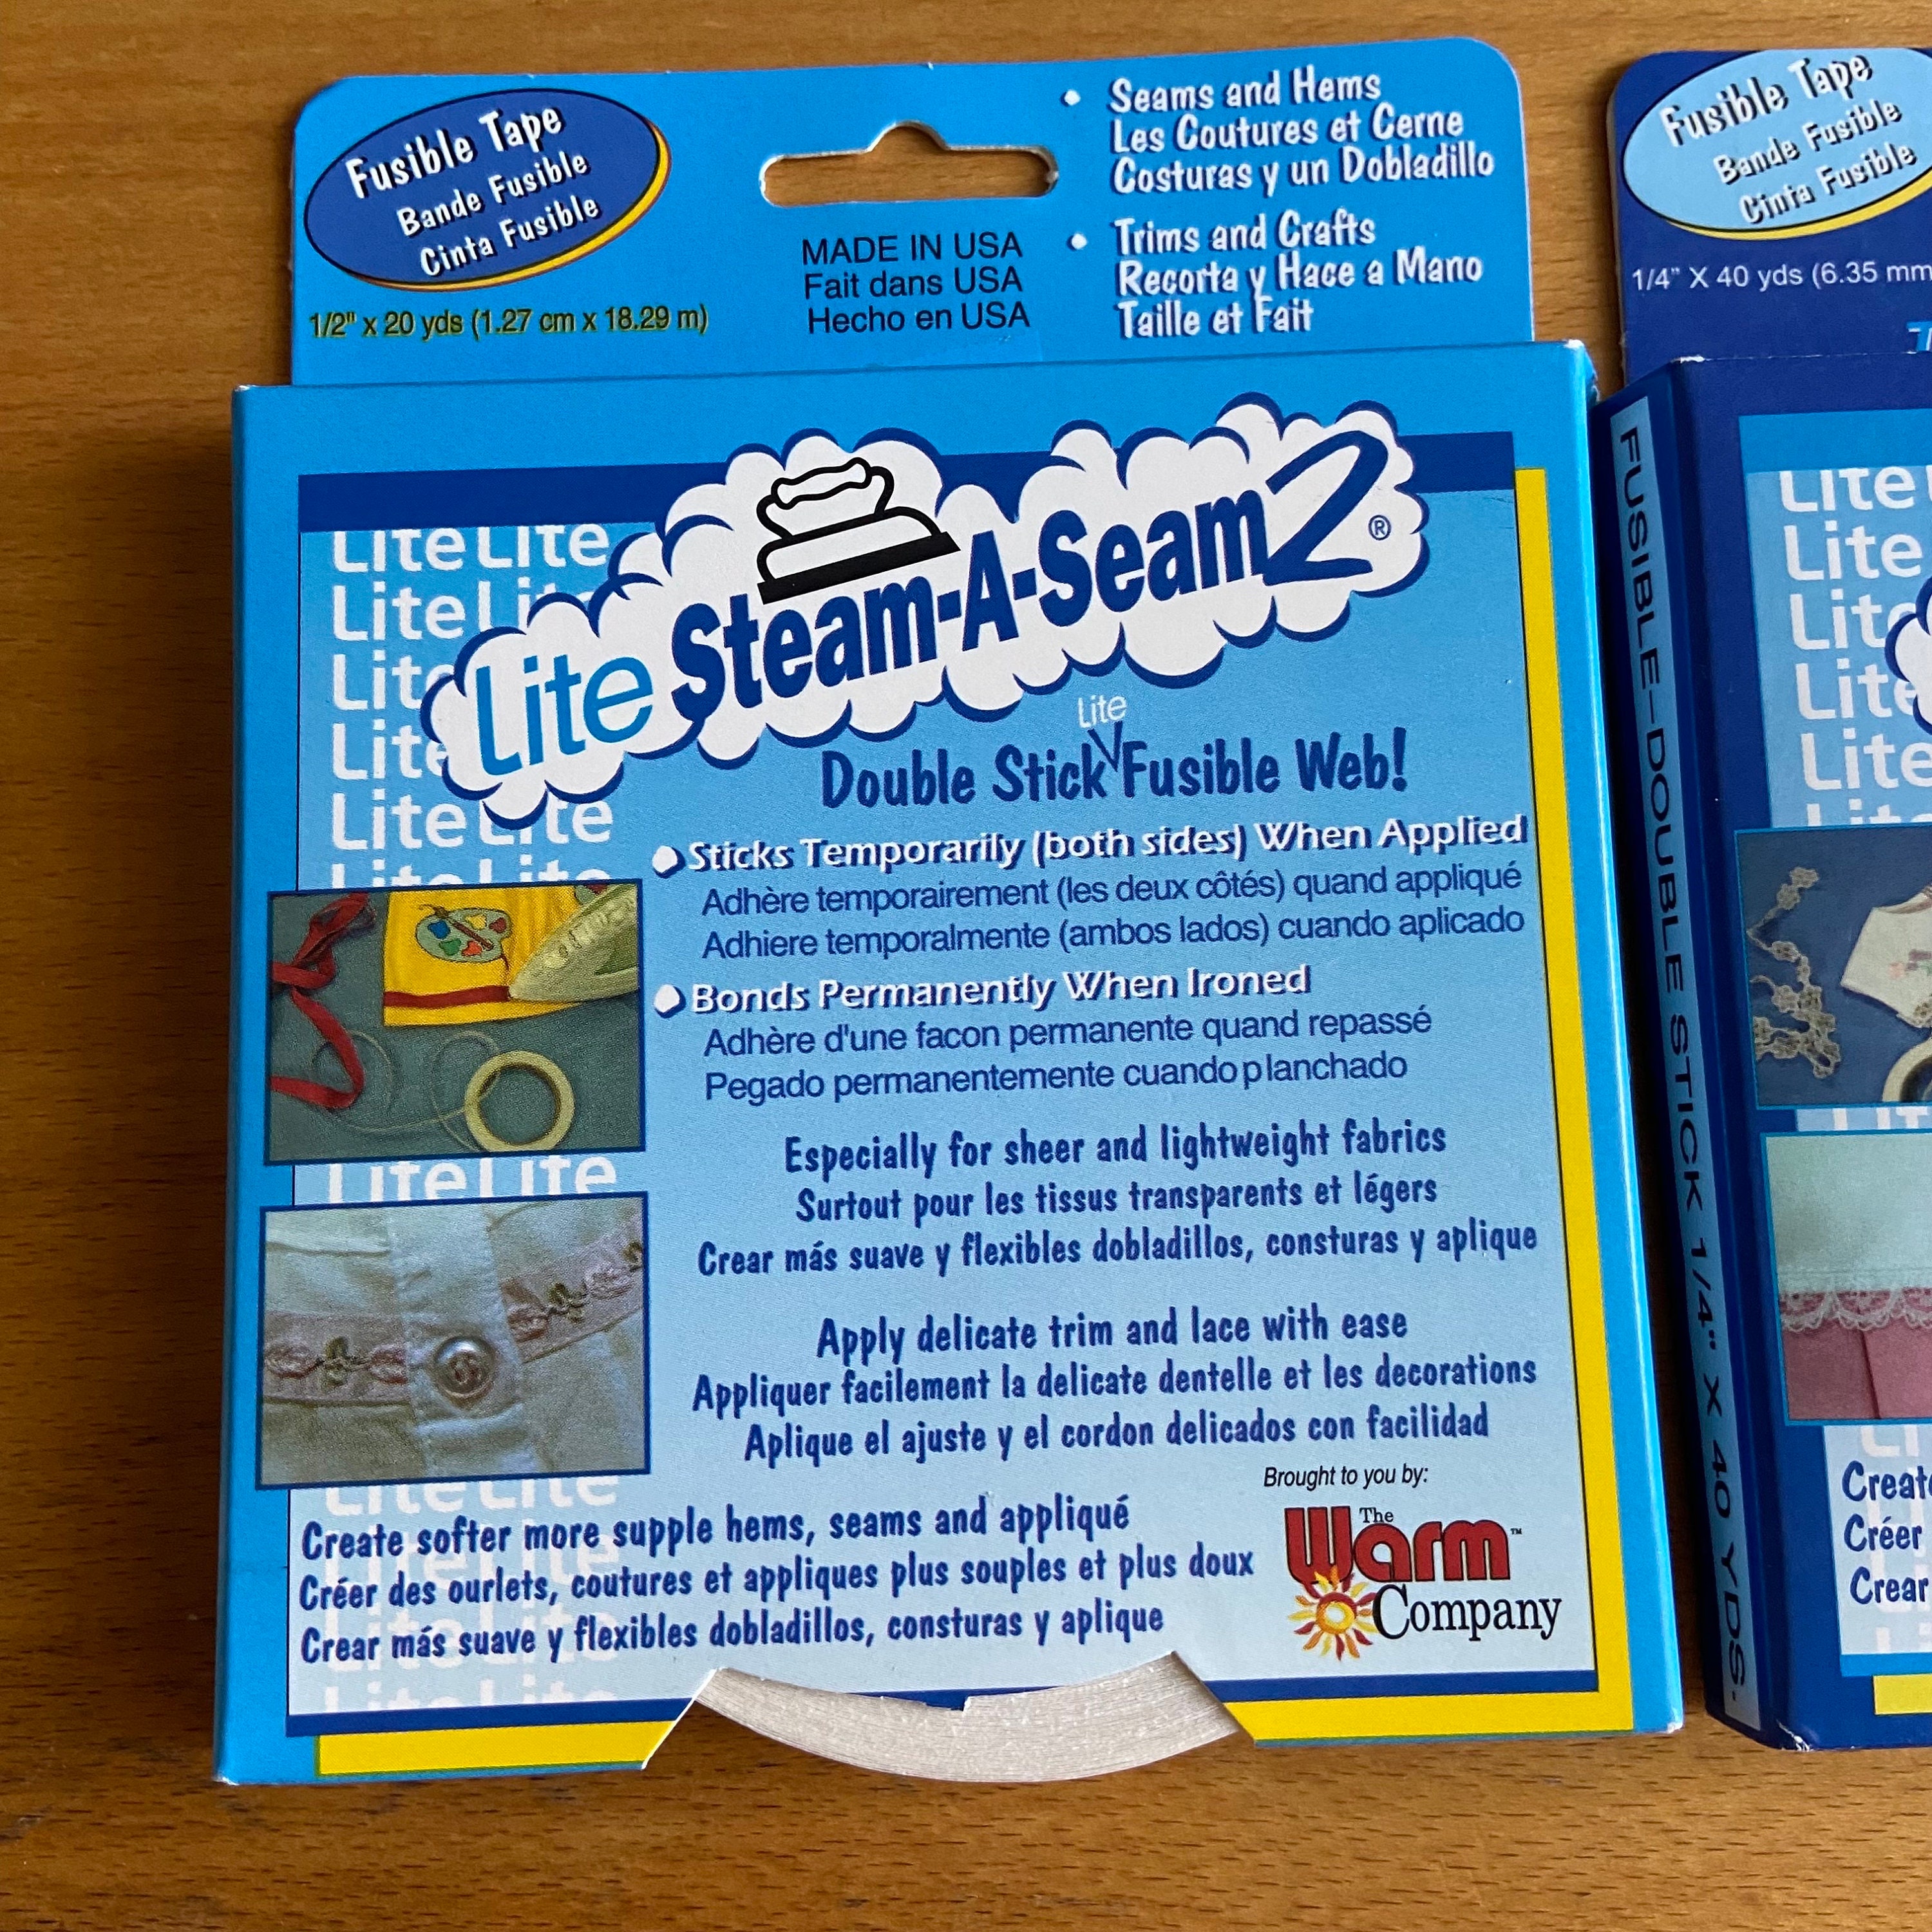 Steam A Seam 2 - 18 ($8.44/yd) – Wooden SpoolsQuilting, Knitting and  More!